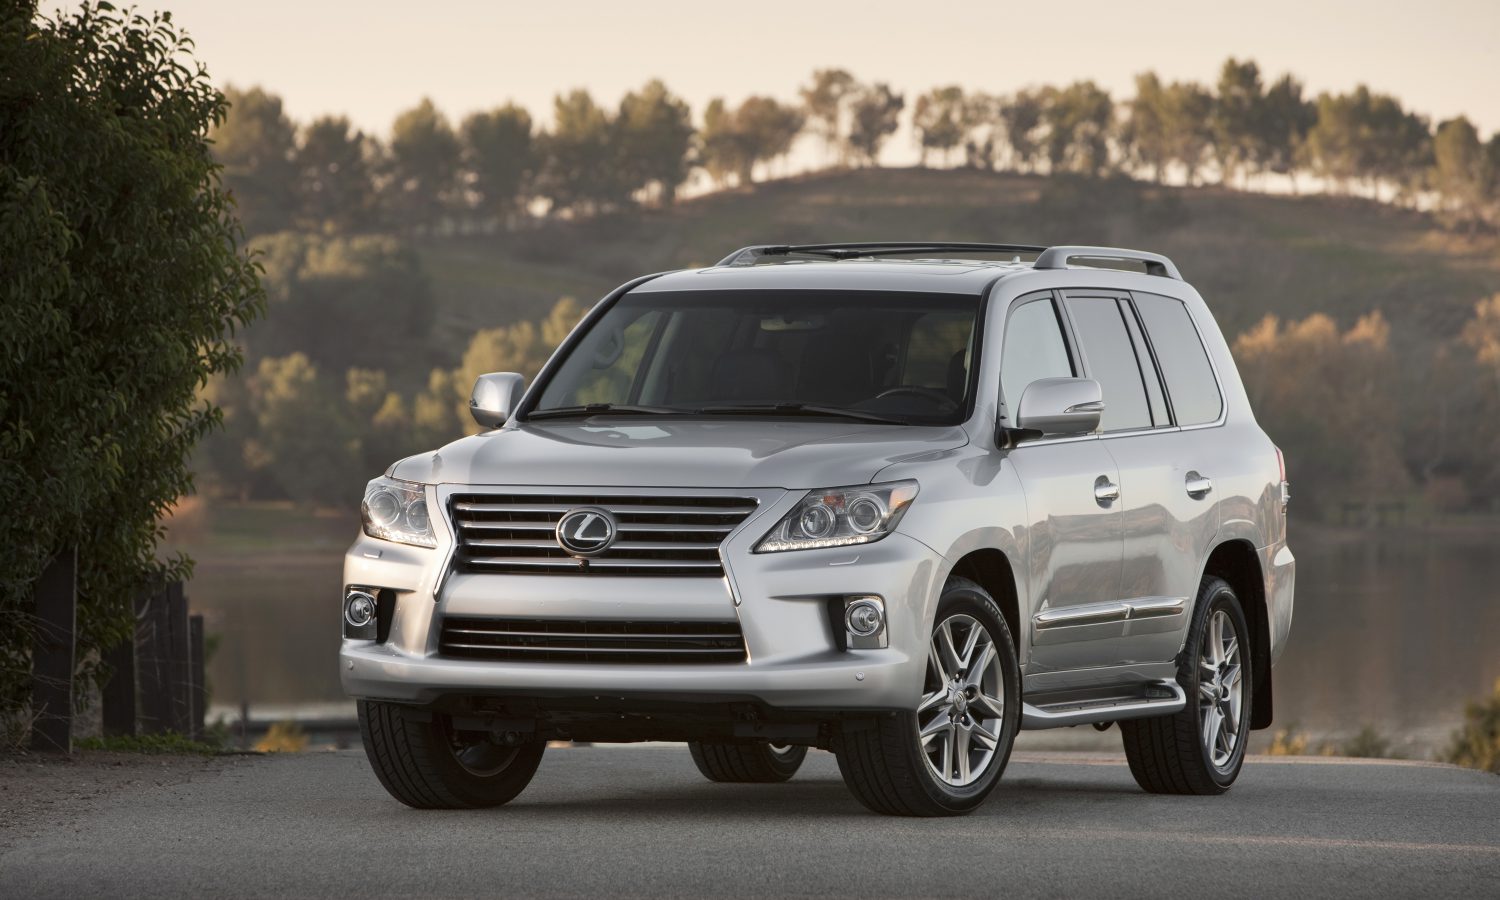 2015 Lexus LX 570 Goes Where Other Luxury SUVs Don't Dare, and Goes There  With Utmost Luxury - Lexus USA Newsroom